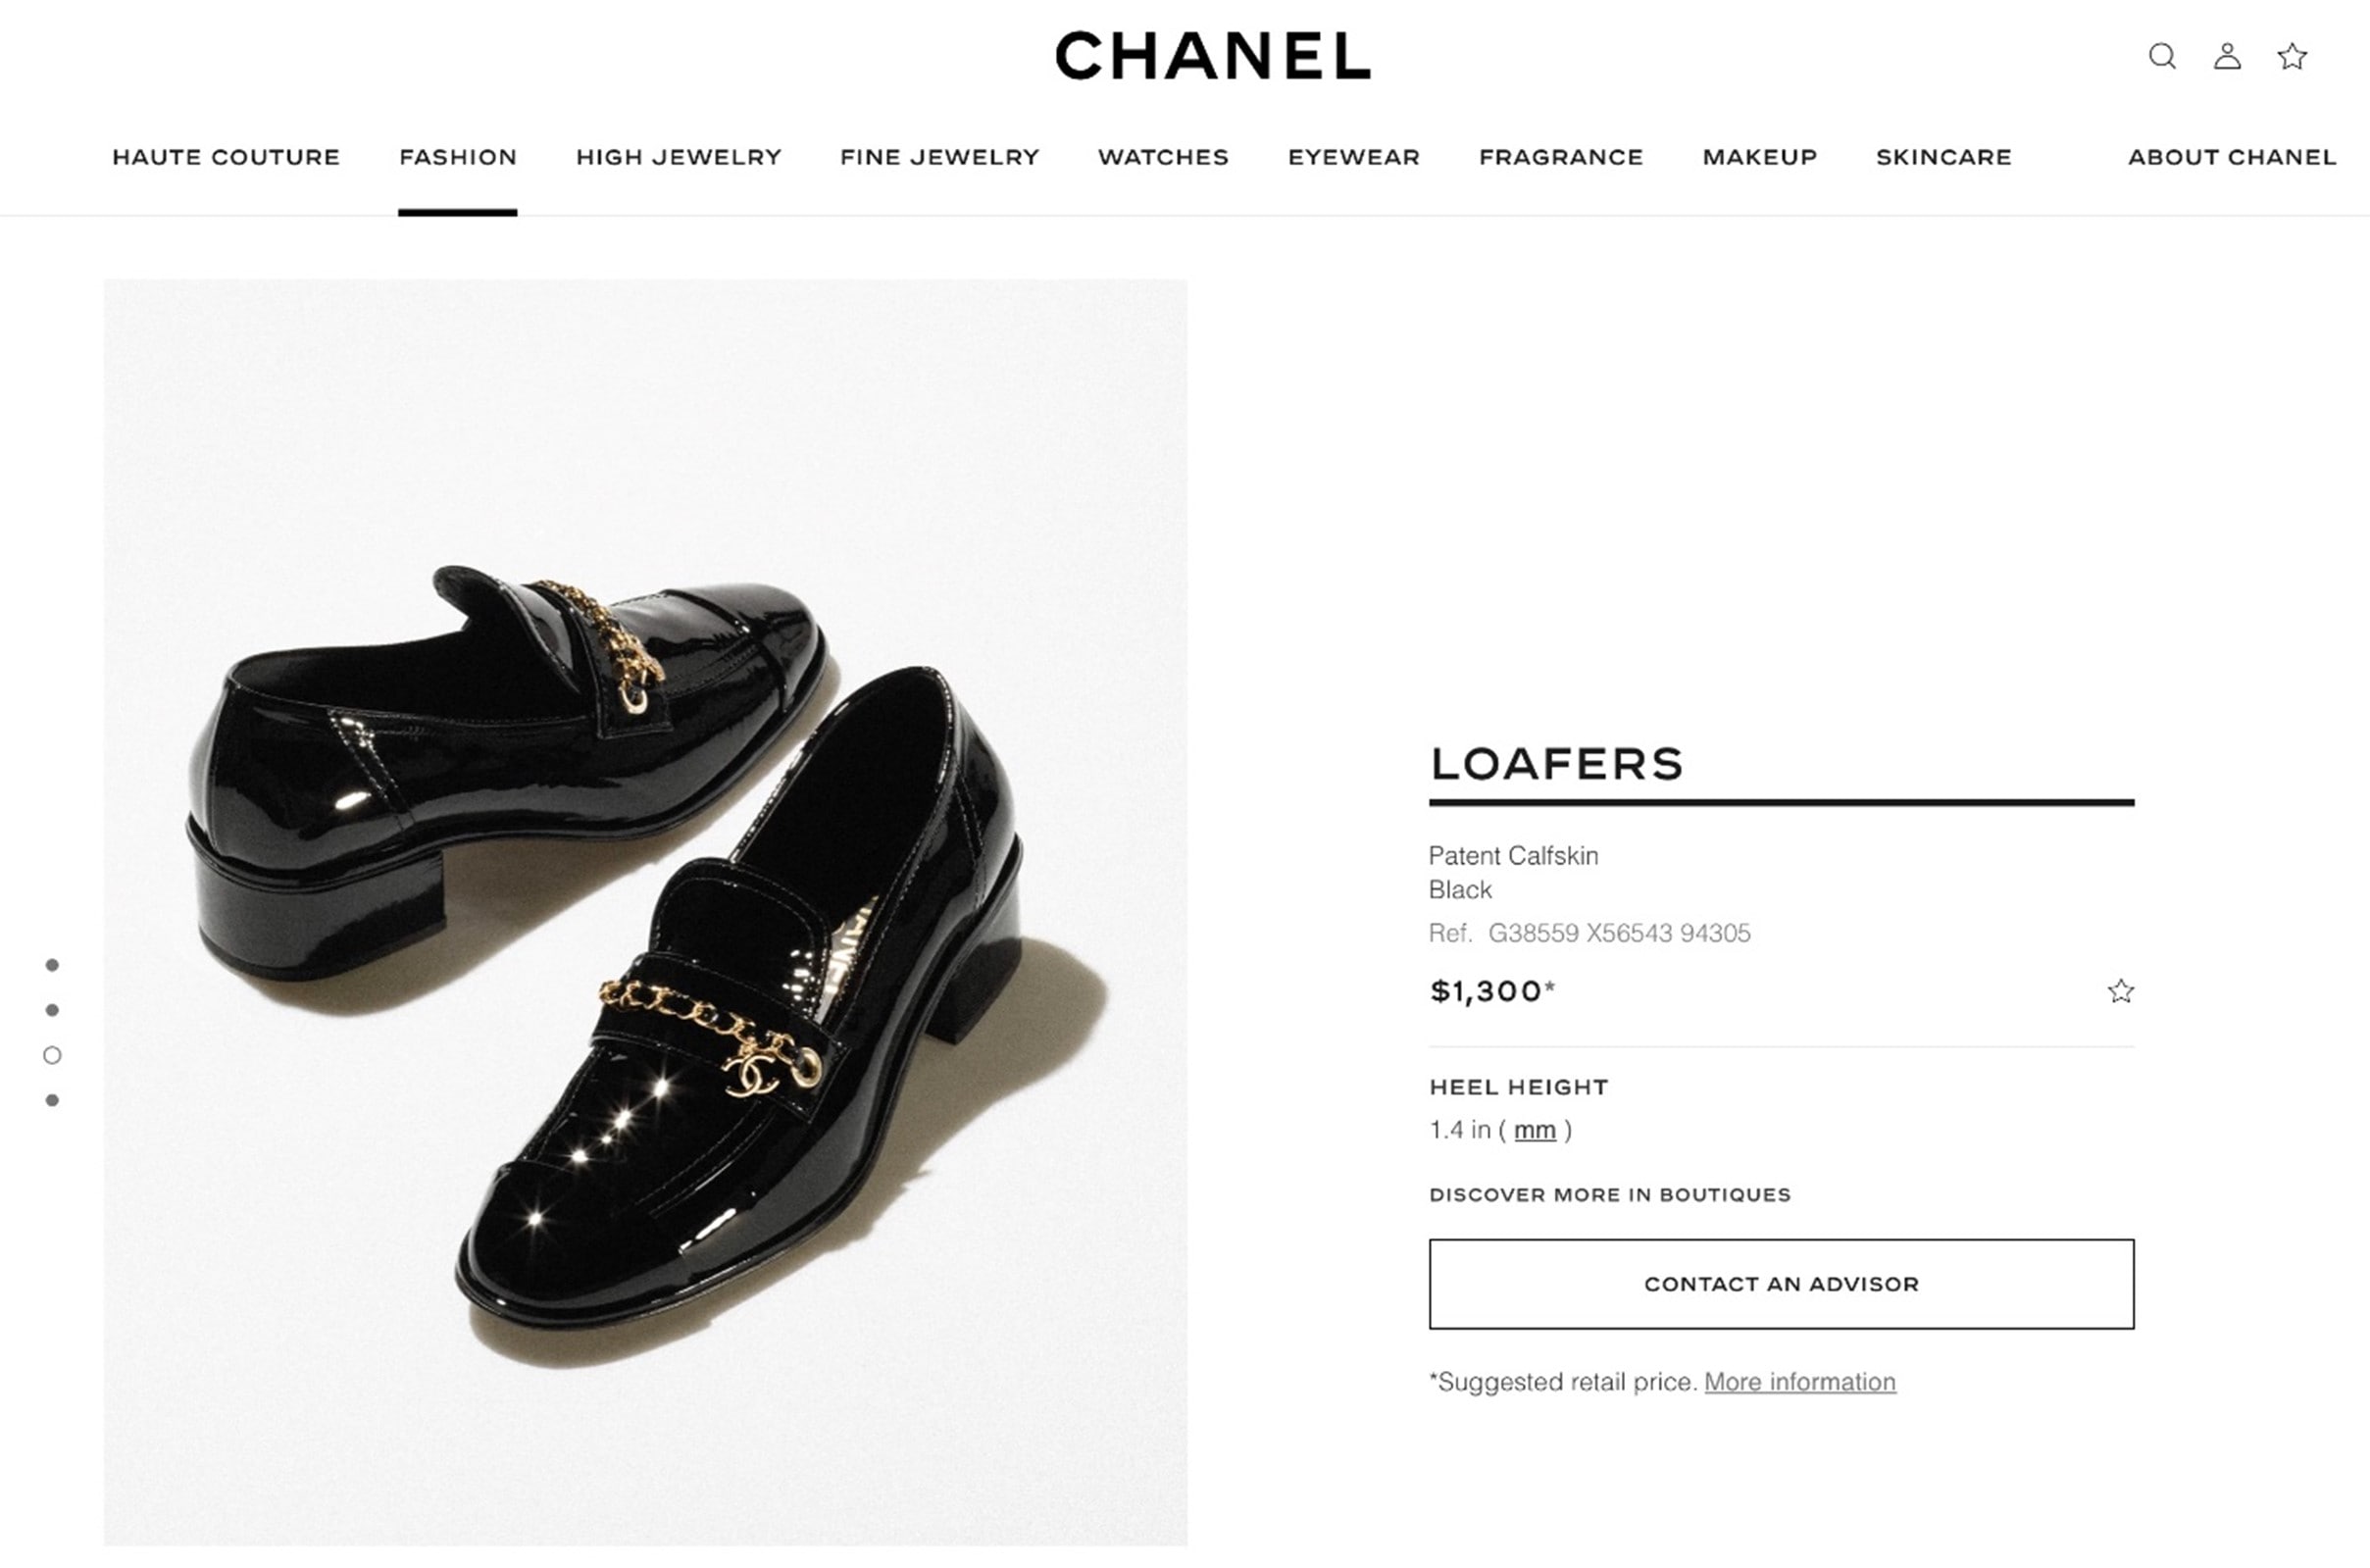 Chanel loafers product page "contact an advisor"